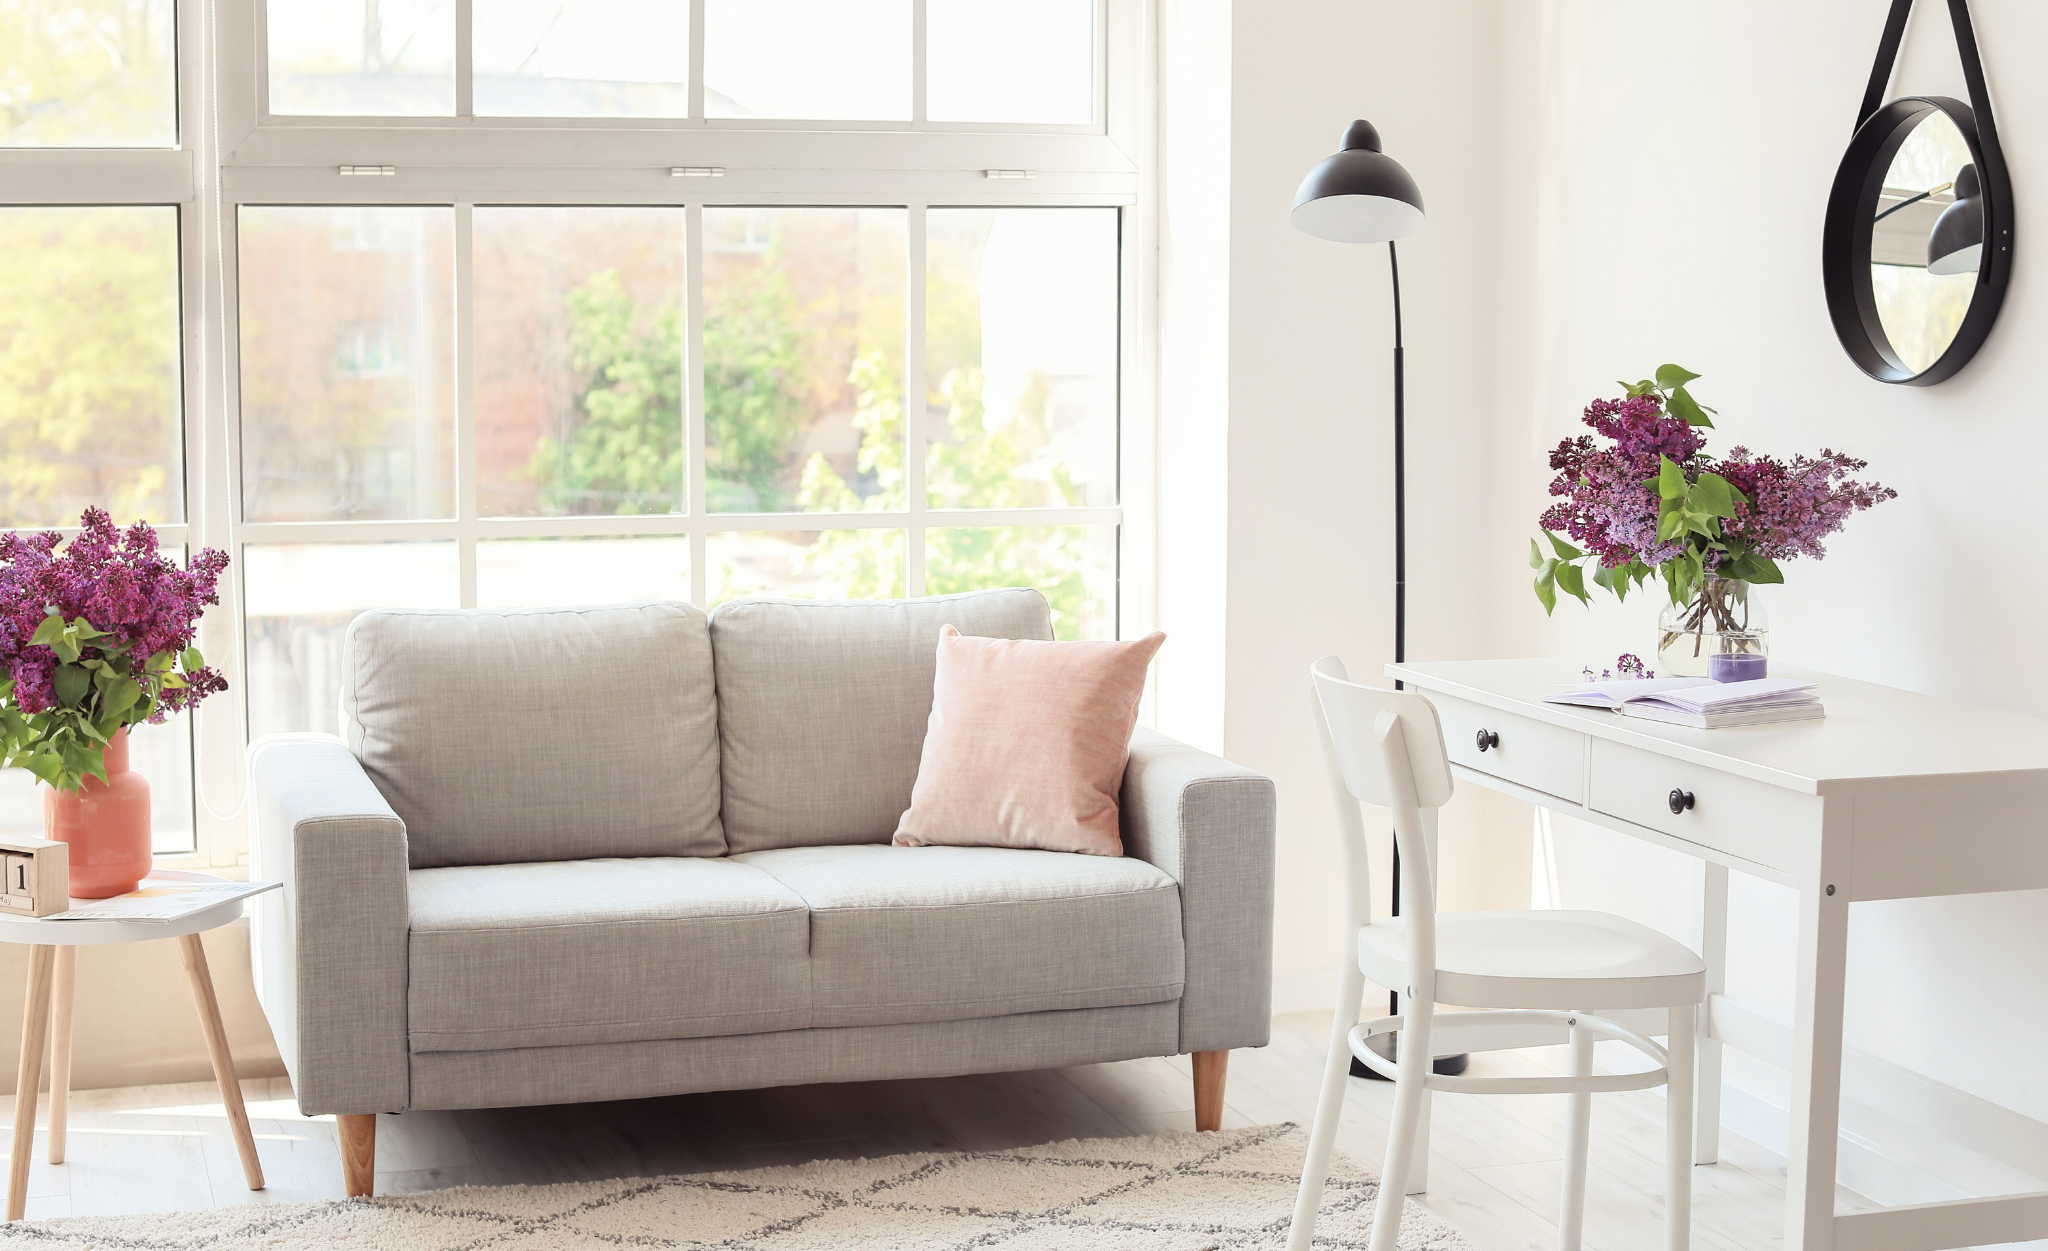 5 Tips to Update Your Space for Spring on a Budget